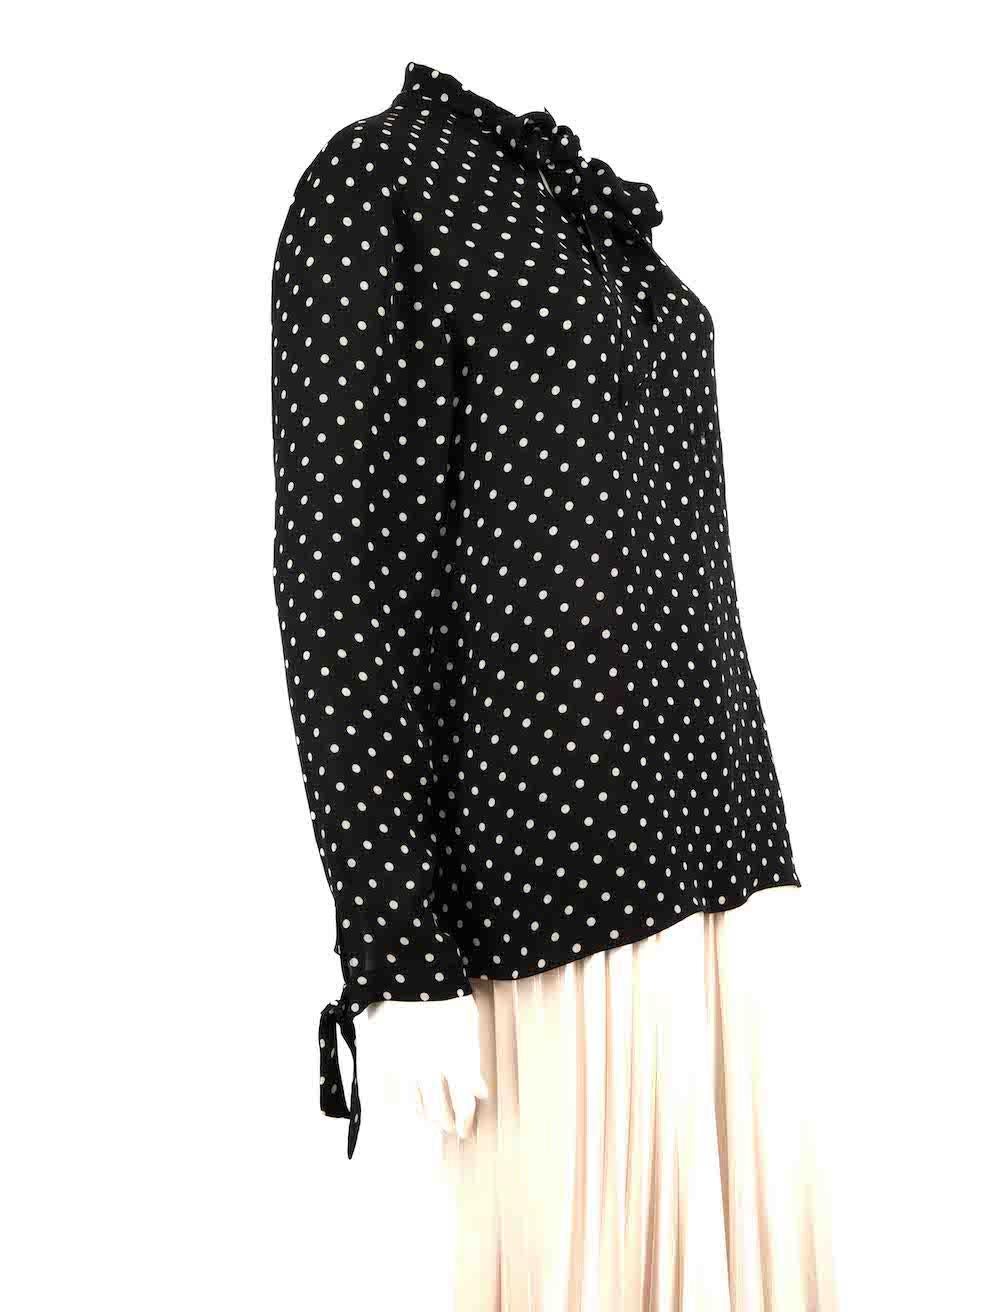 CONDITION is Very good. Minimal wear to blouse is evident. There is an area to the front of the blouse with plucks to the weave on this used Valentino designer resale item.
 
 Details
 Black
 Silk
 Blouse
 Polkadot pattern
 Long sleeves
 Sheer
 Neck